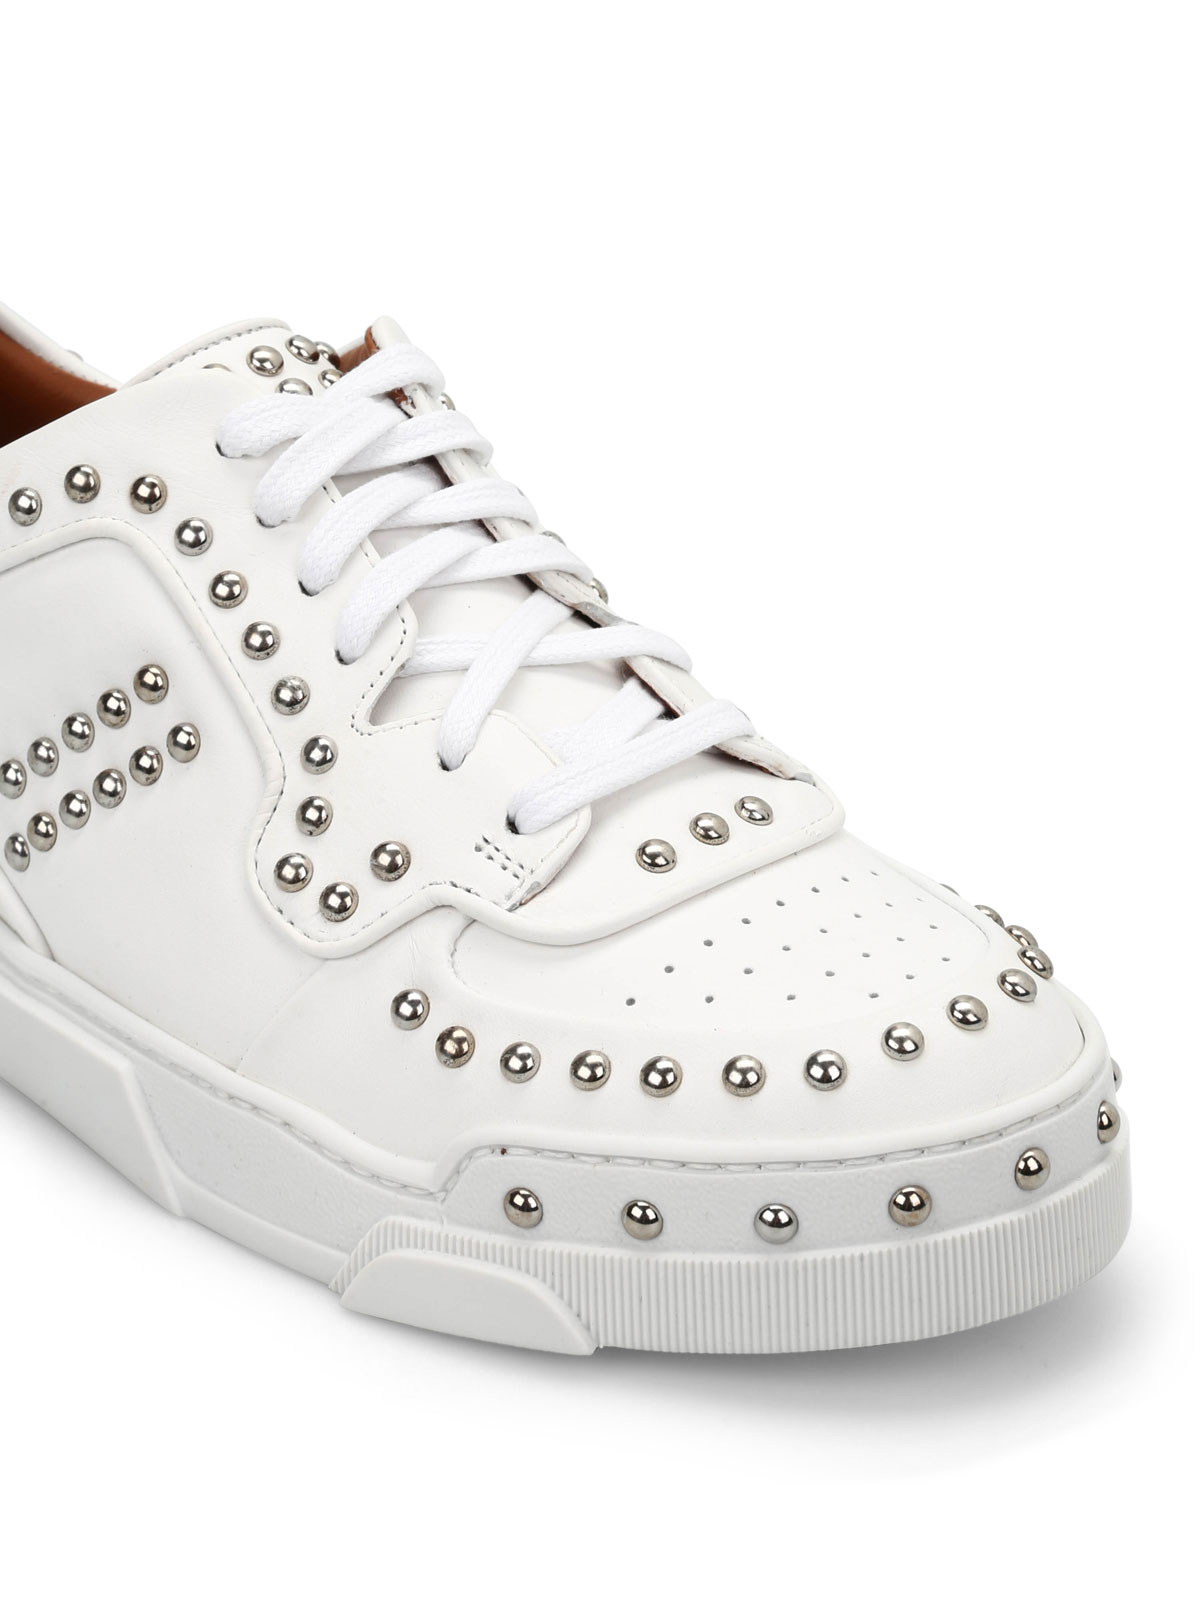 Givenchy - Tyson II studded sneakers 